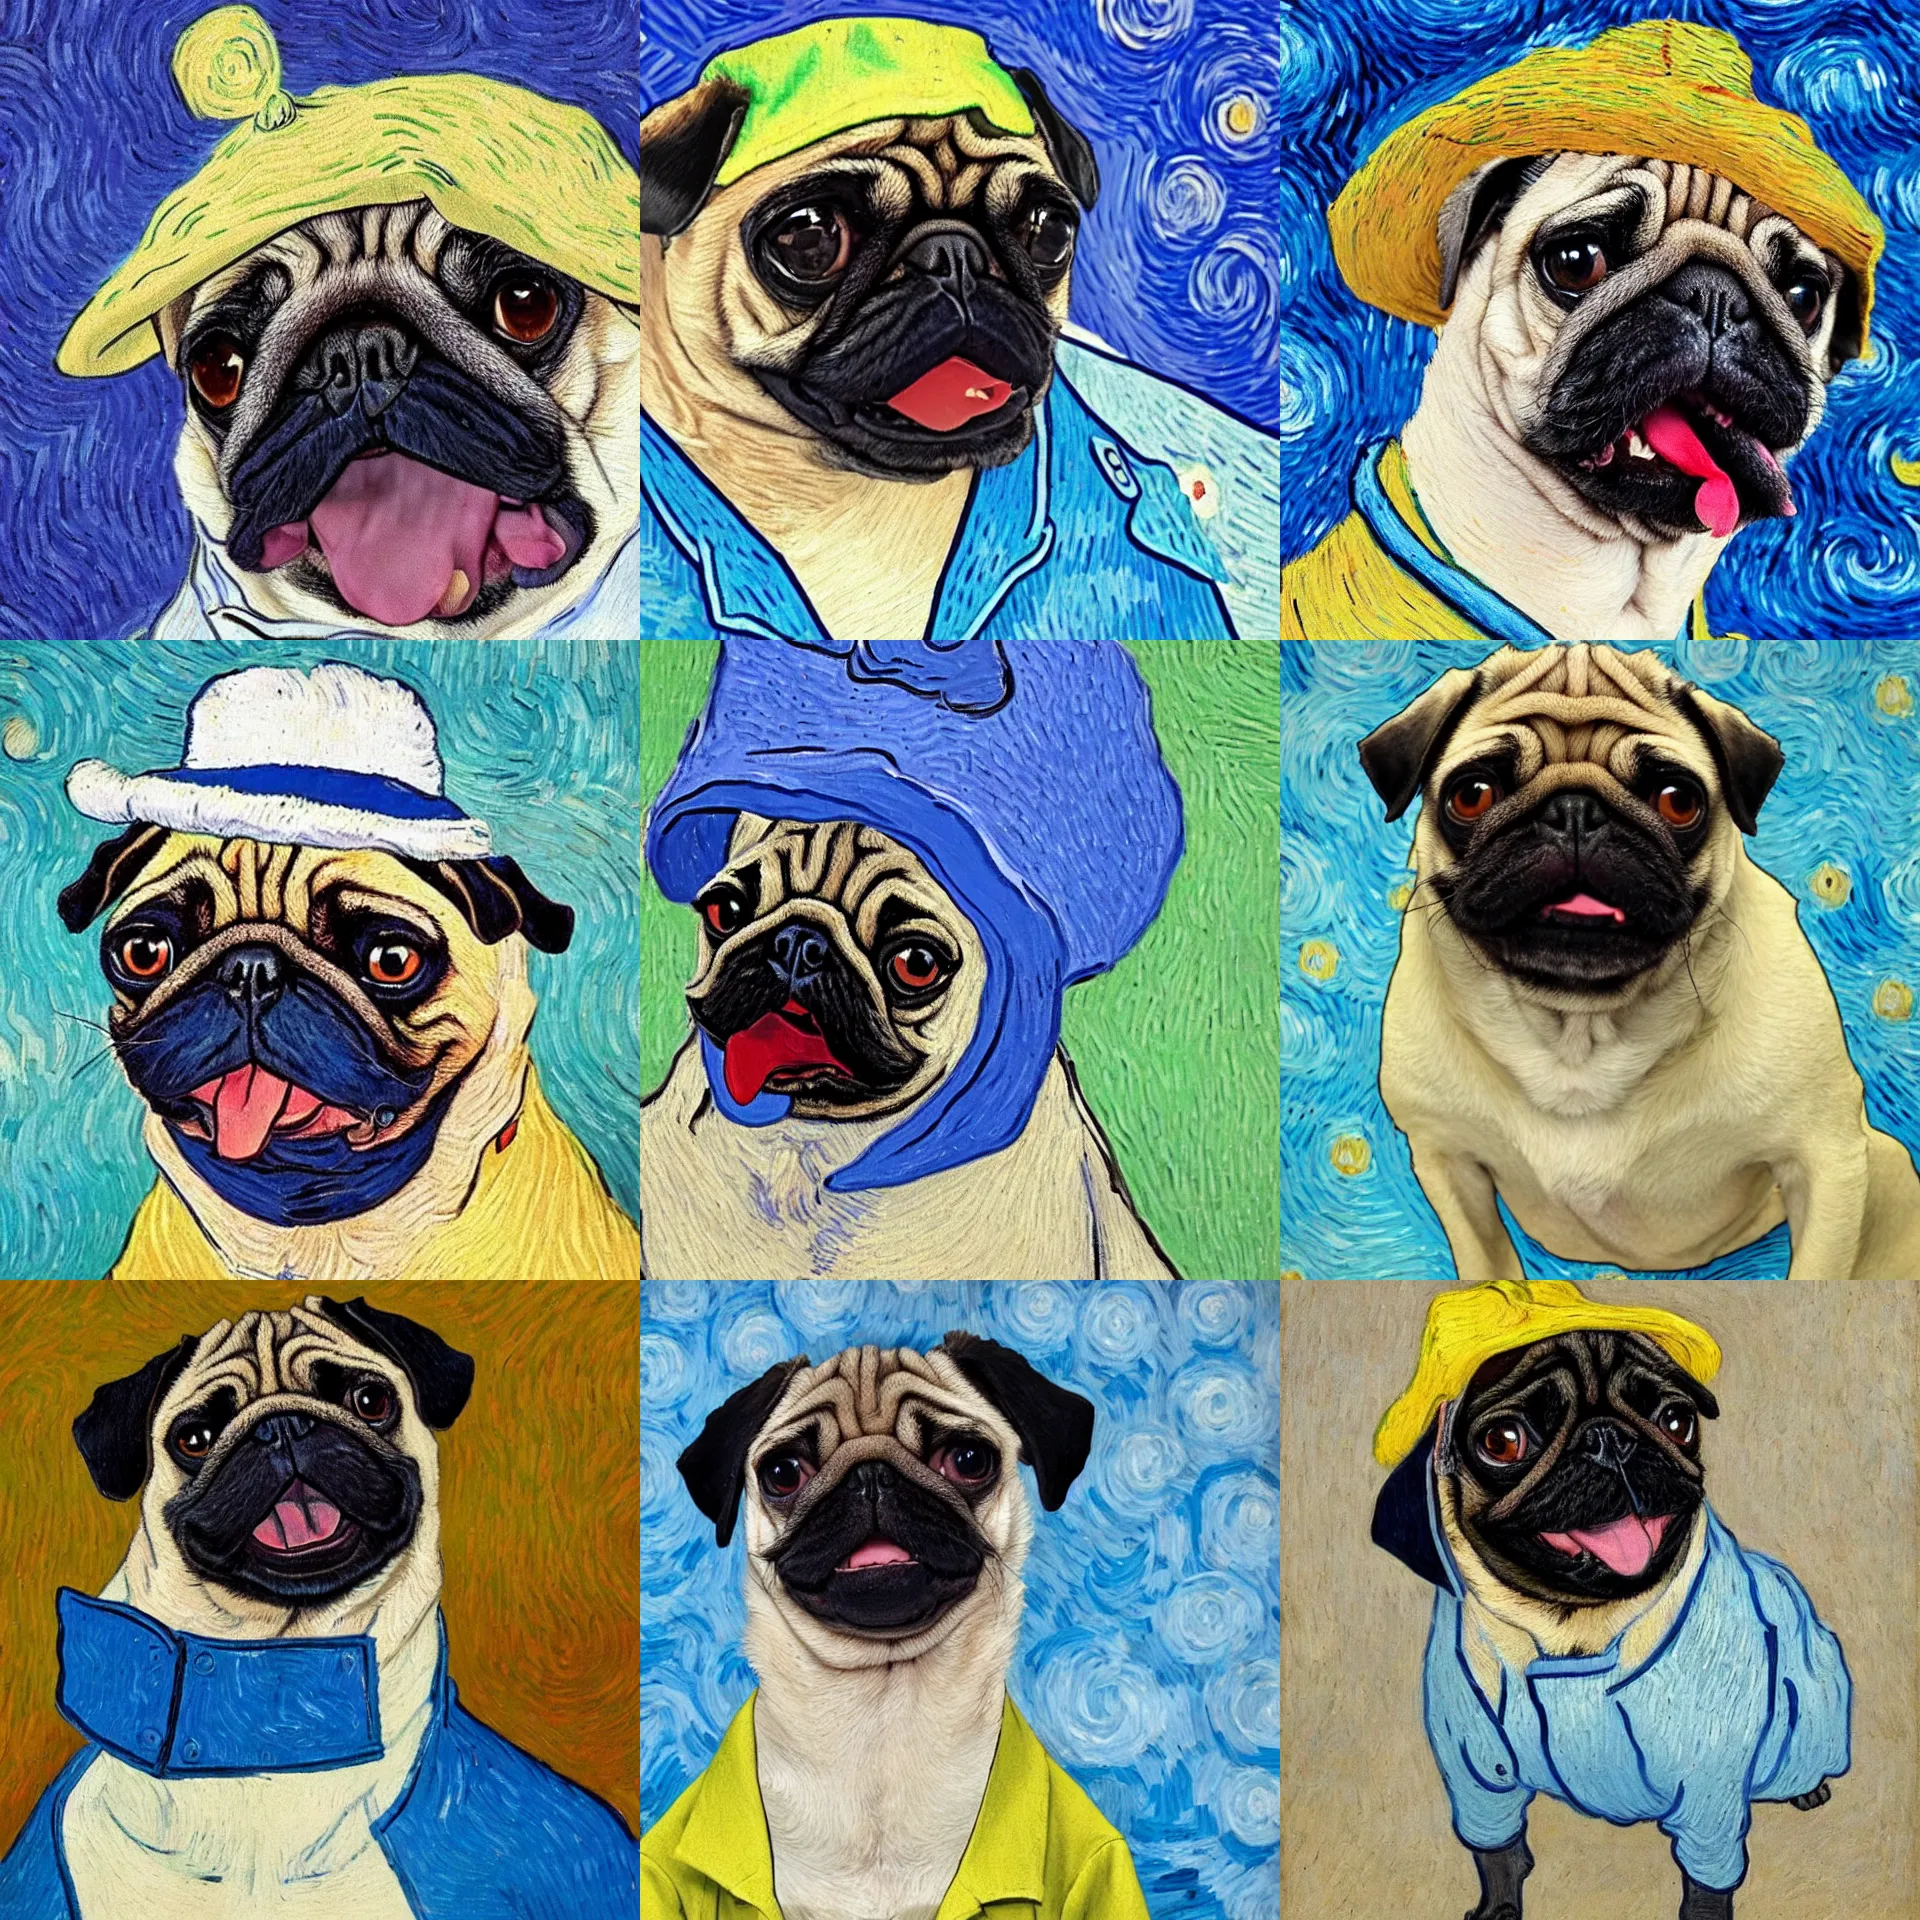 Prompt: a confused pug sticking his tongue out, wearing a blue jacket, a white shirt and a funny hat as a Van Gogh painting